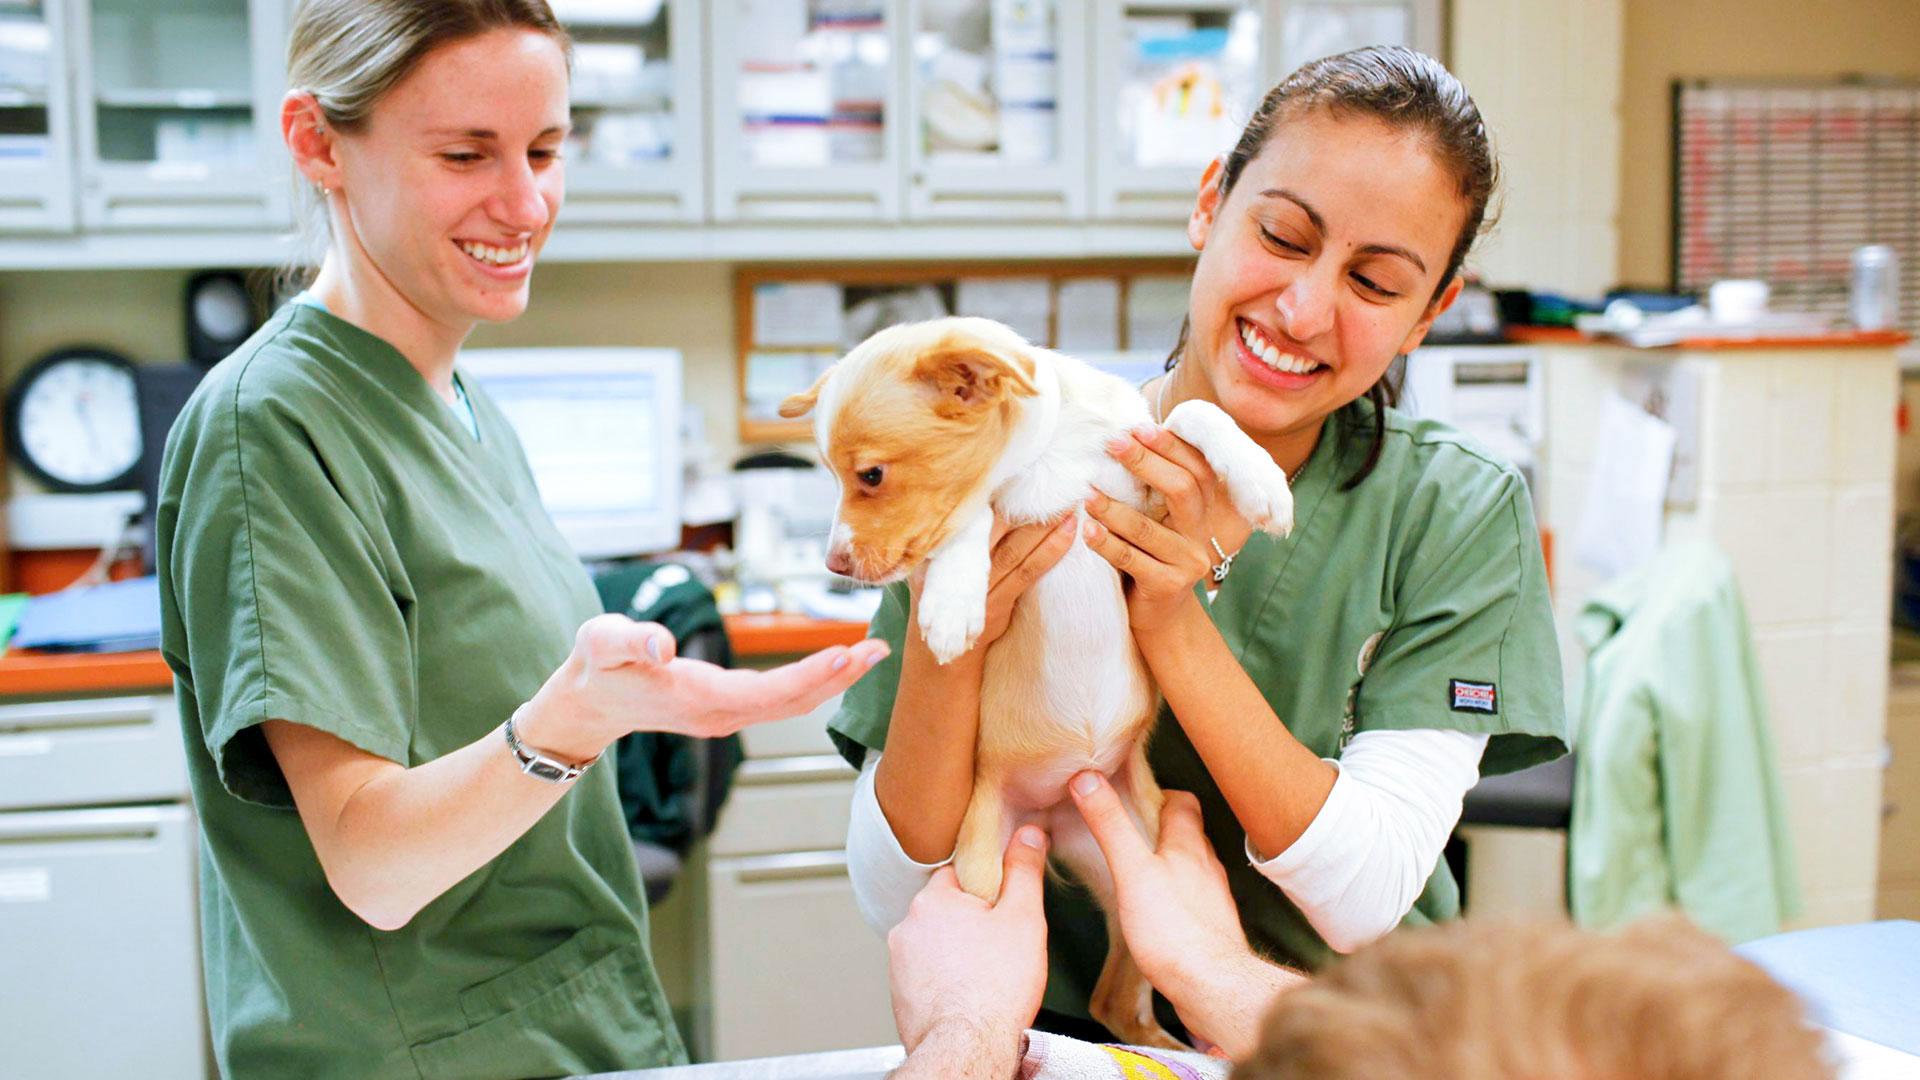 A Guide to Enhancing Wellbeing and Managing Work Stress in the Veterinary Workplace